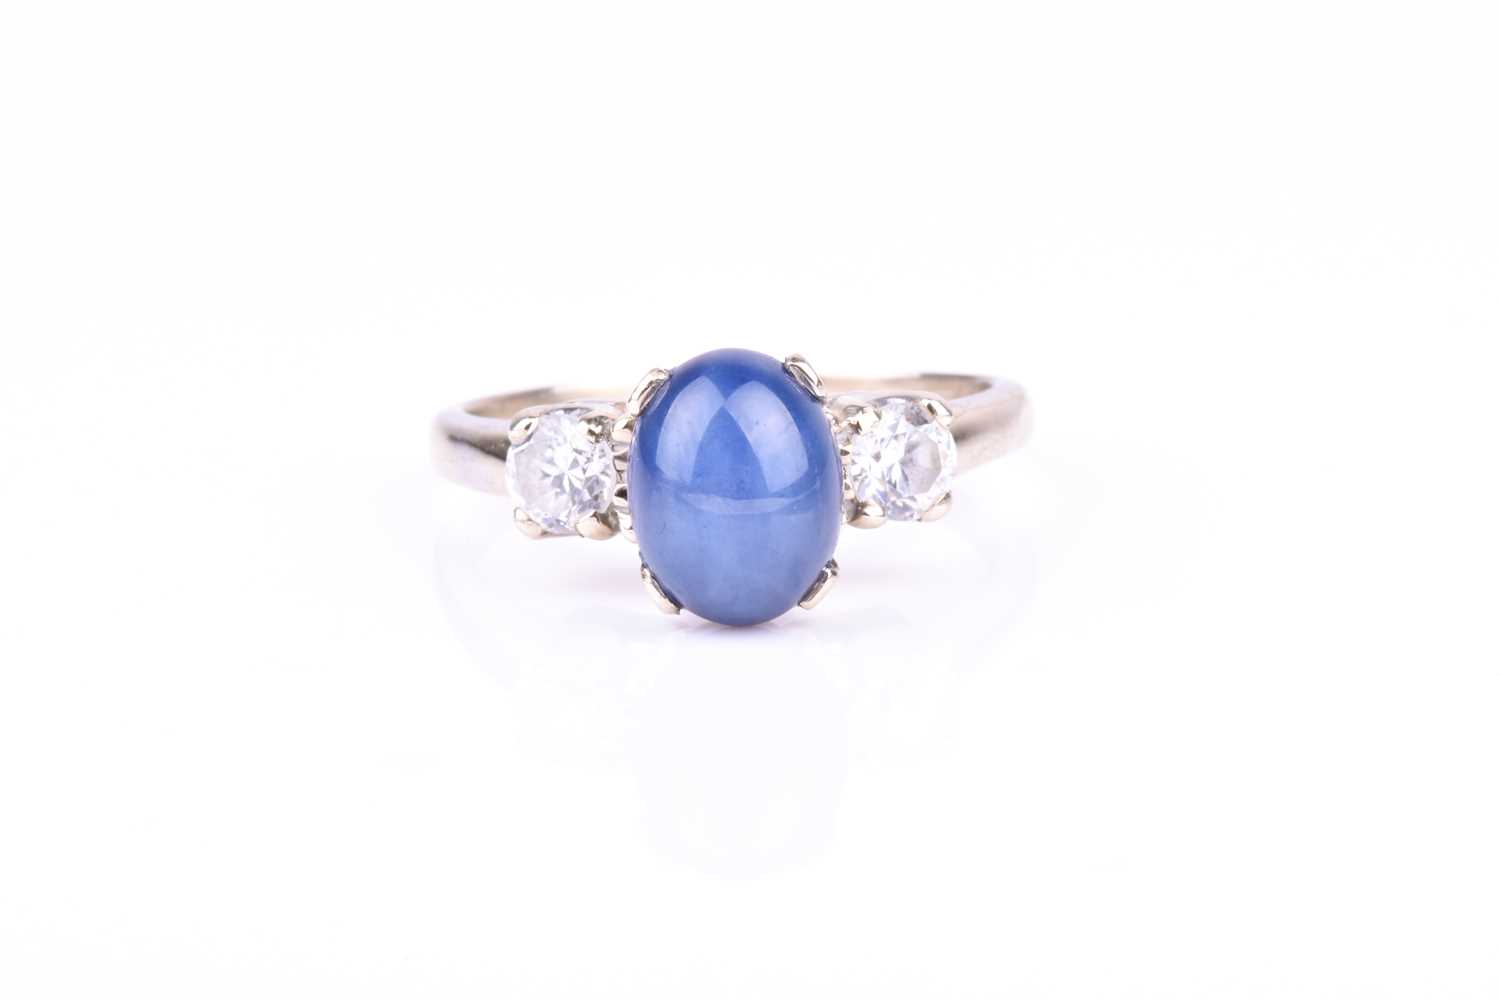 A 14k white gold, star sapphire, and CZ ringset with an oval star sapphire flanked with two round-